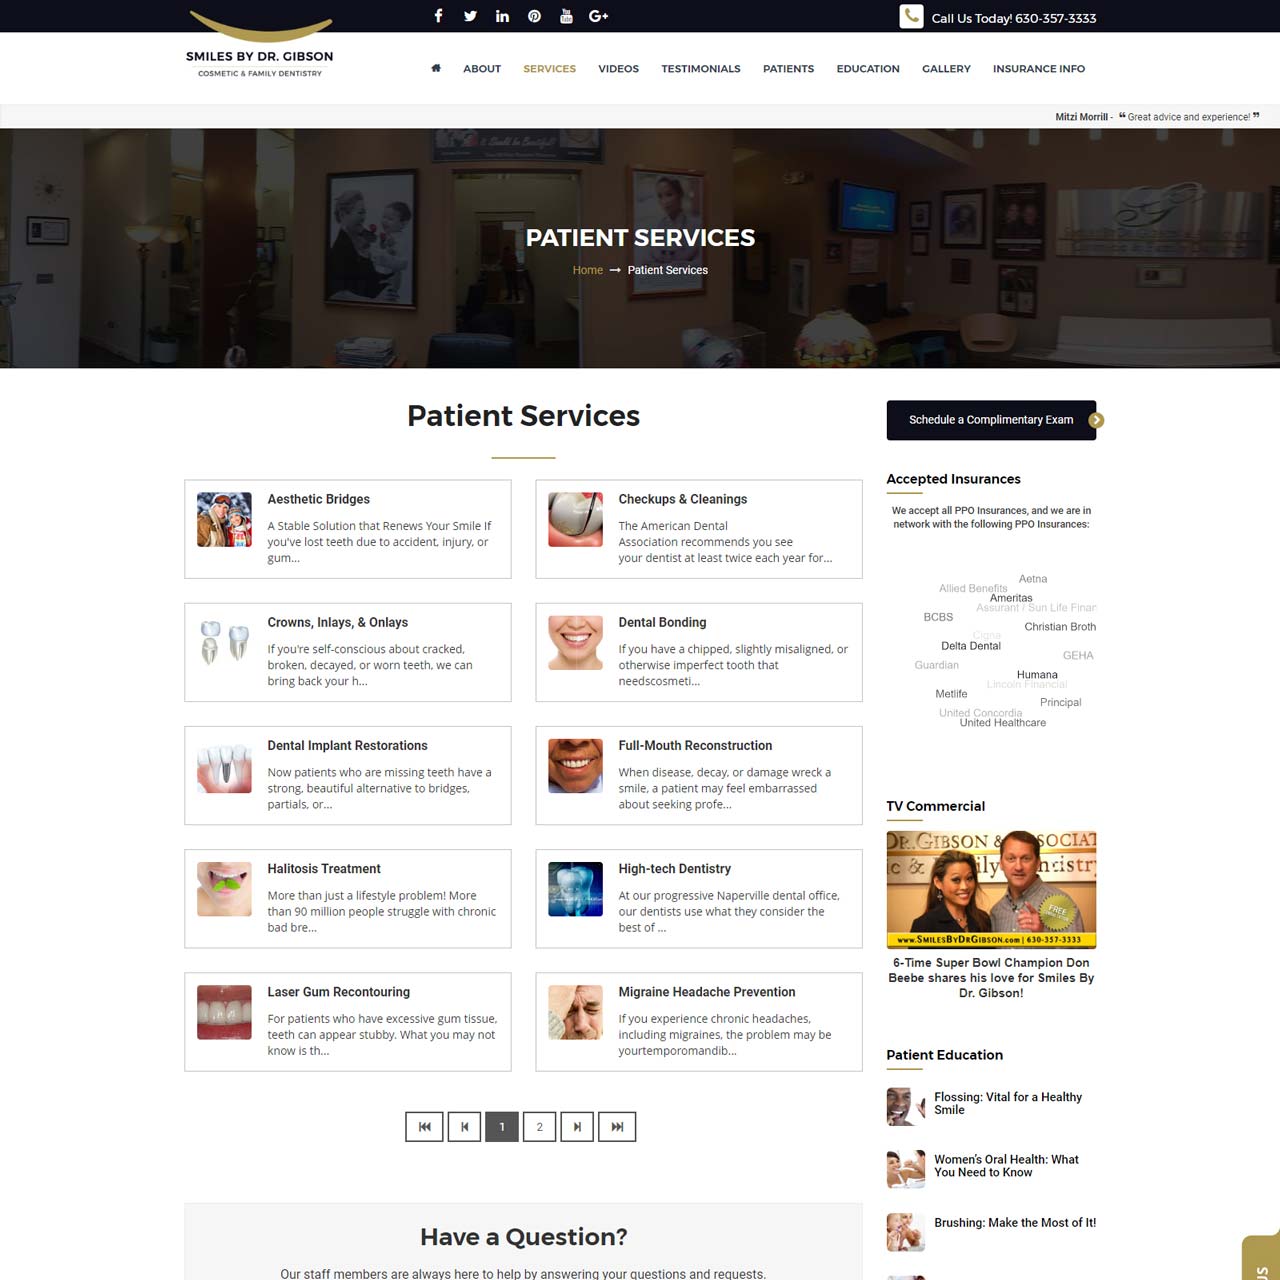 Service Page